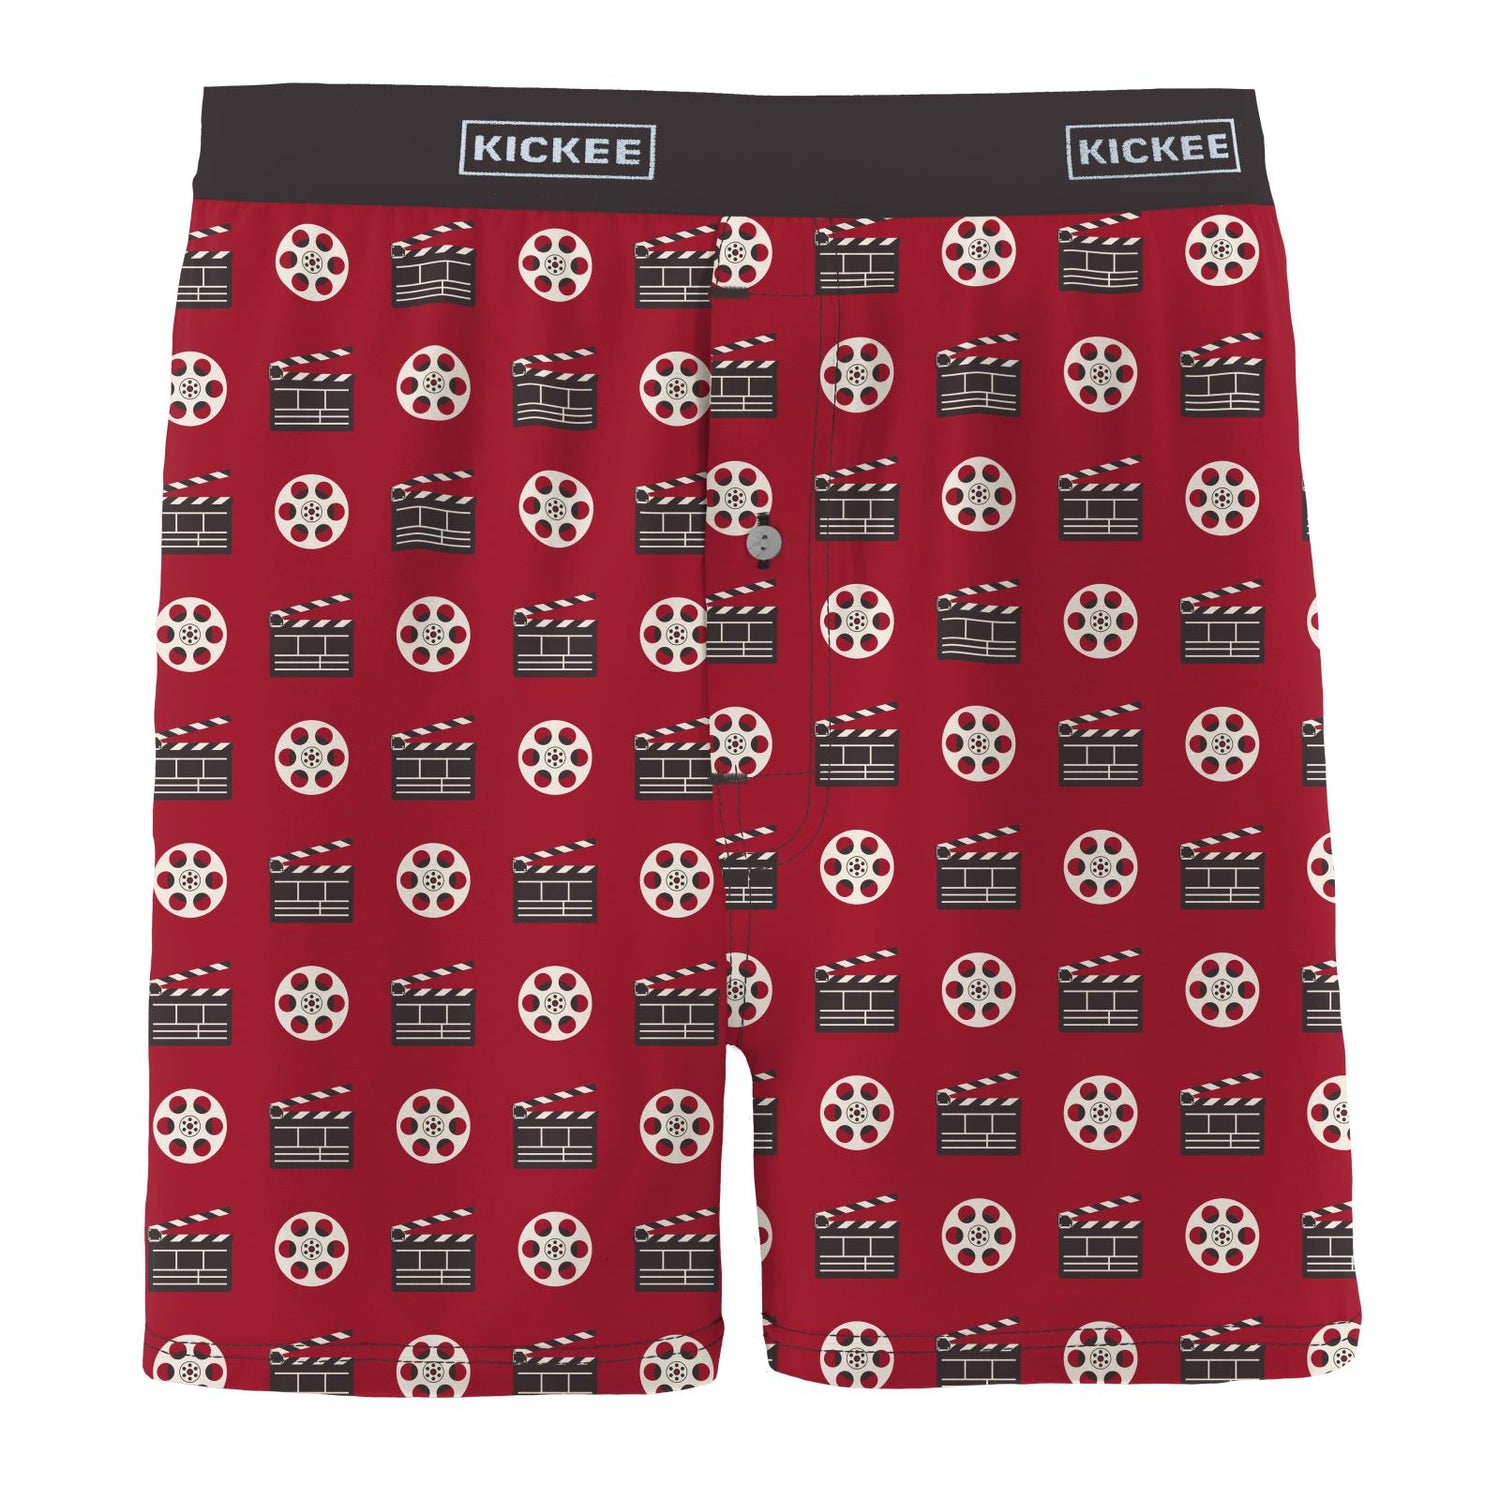 Men's Print Boxer Short in Candy Apple Clapper Board and Film